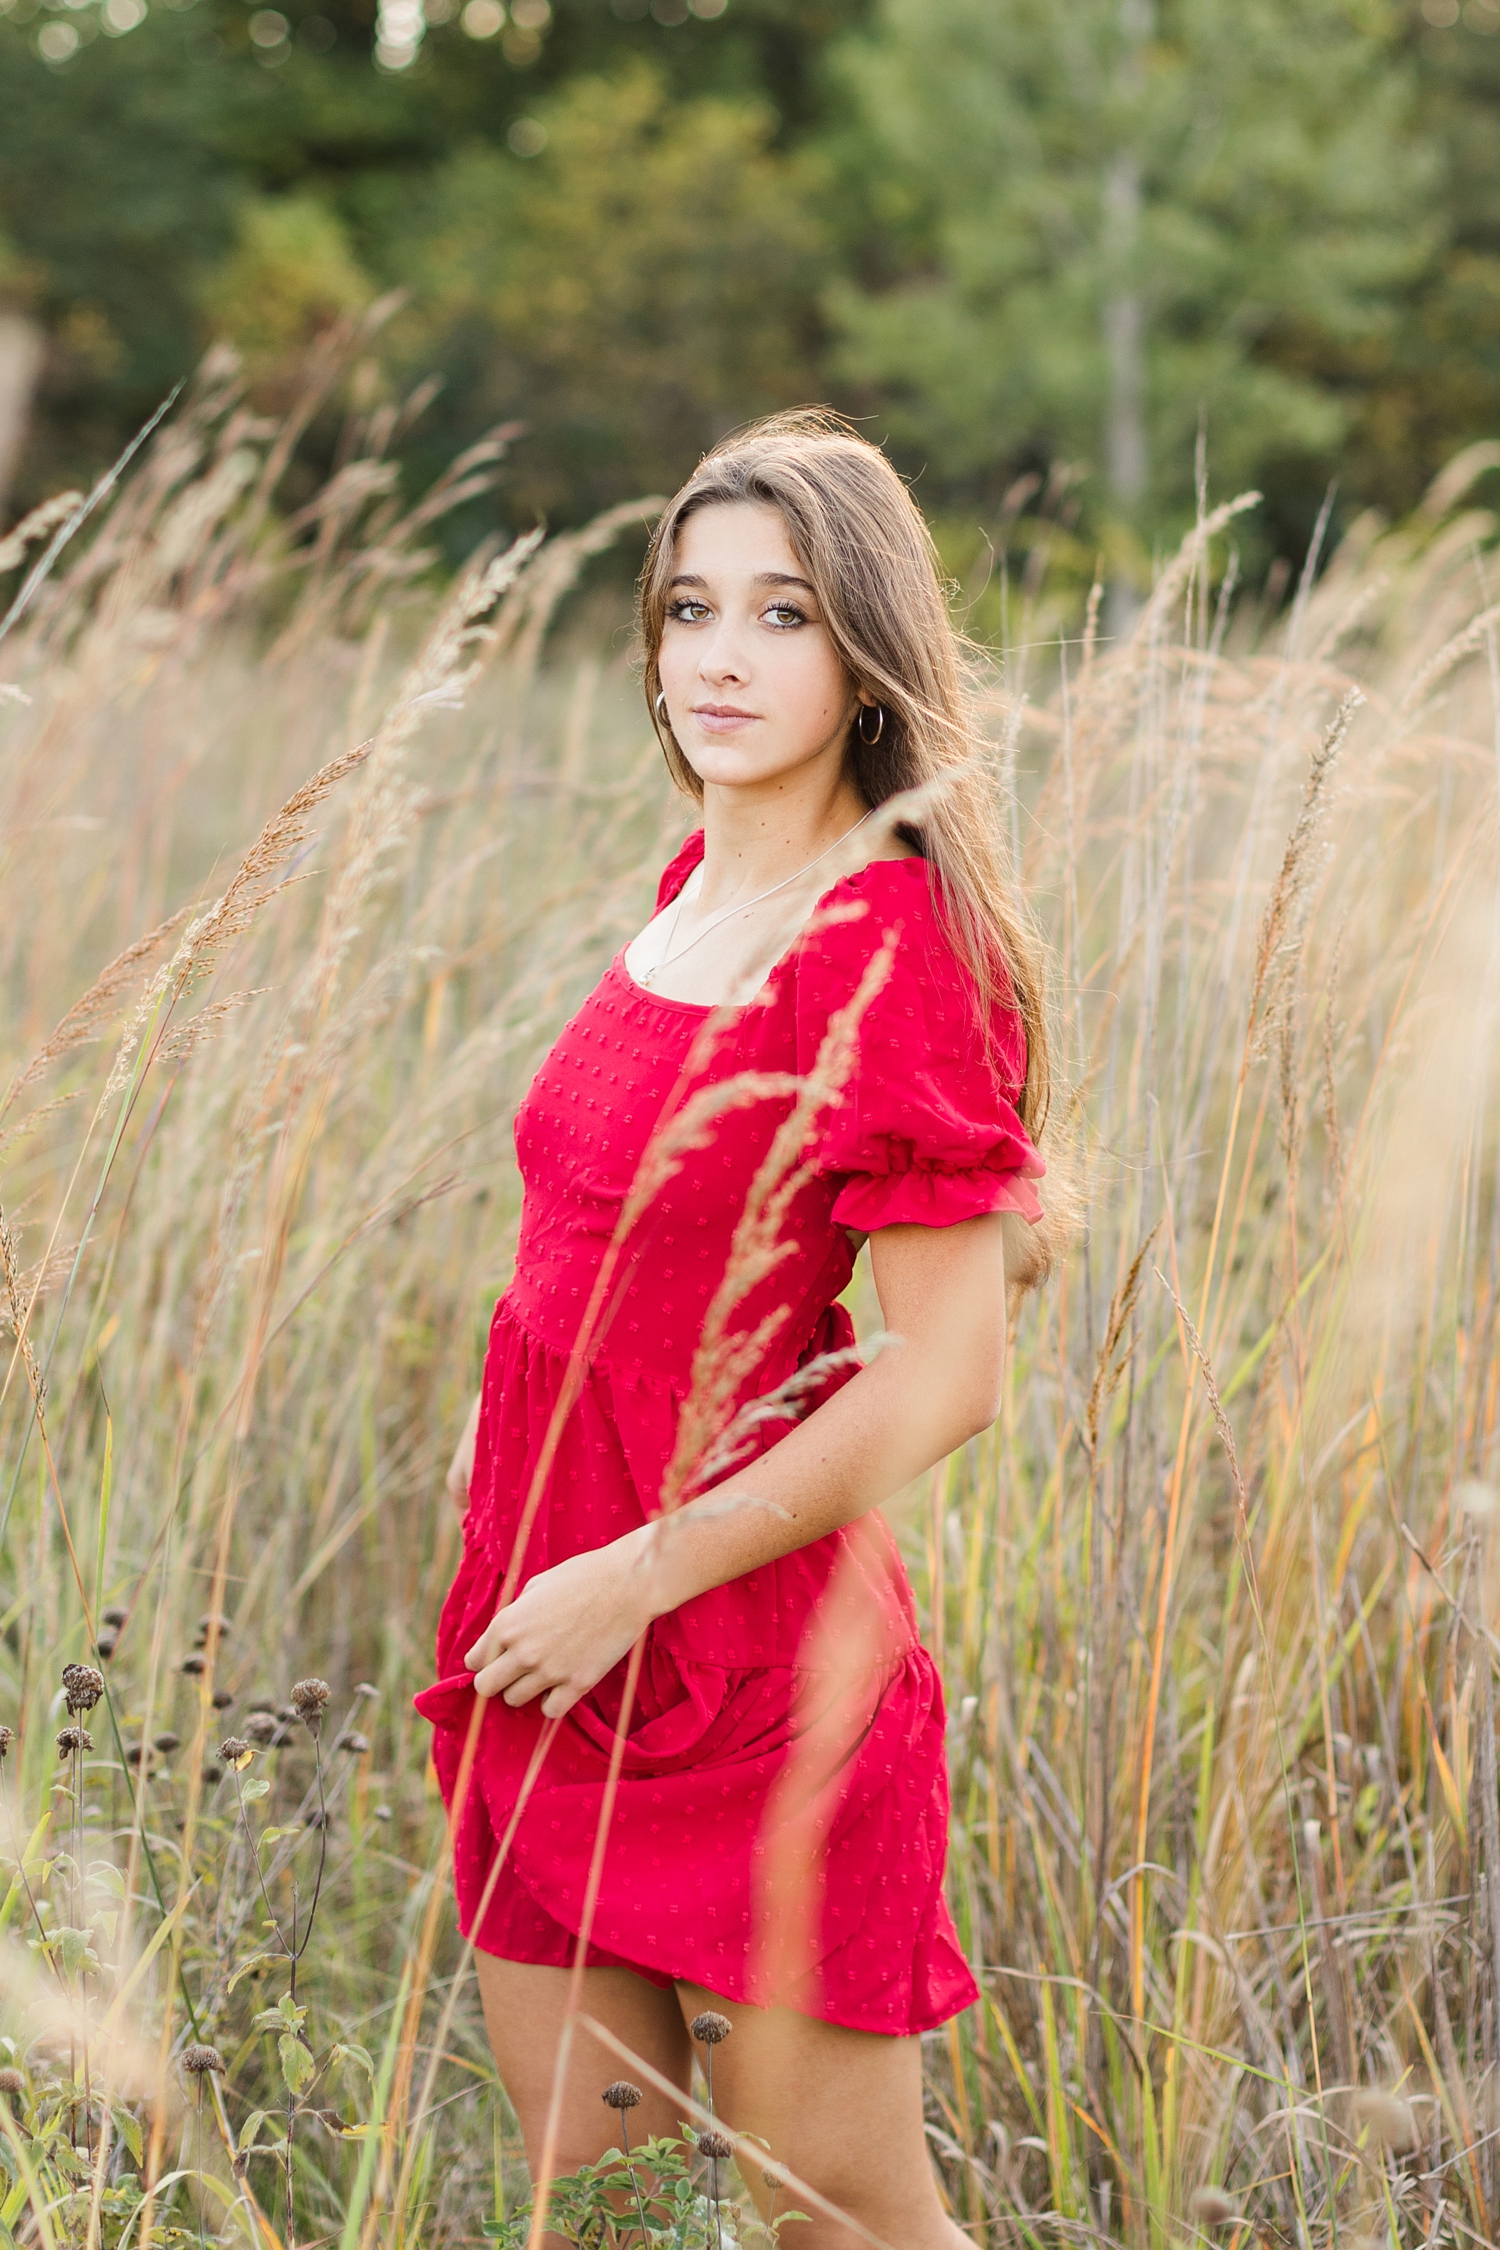 Sarah, wearing a red dress, walks in a grassy field in Iowa during the fall | CB Studio